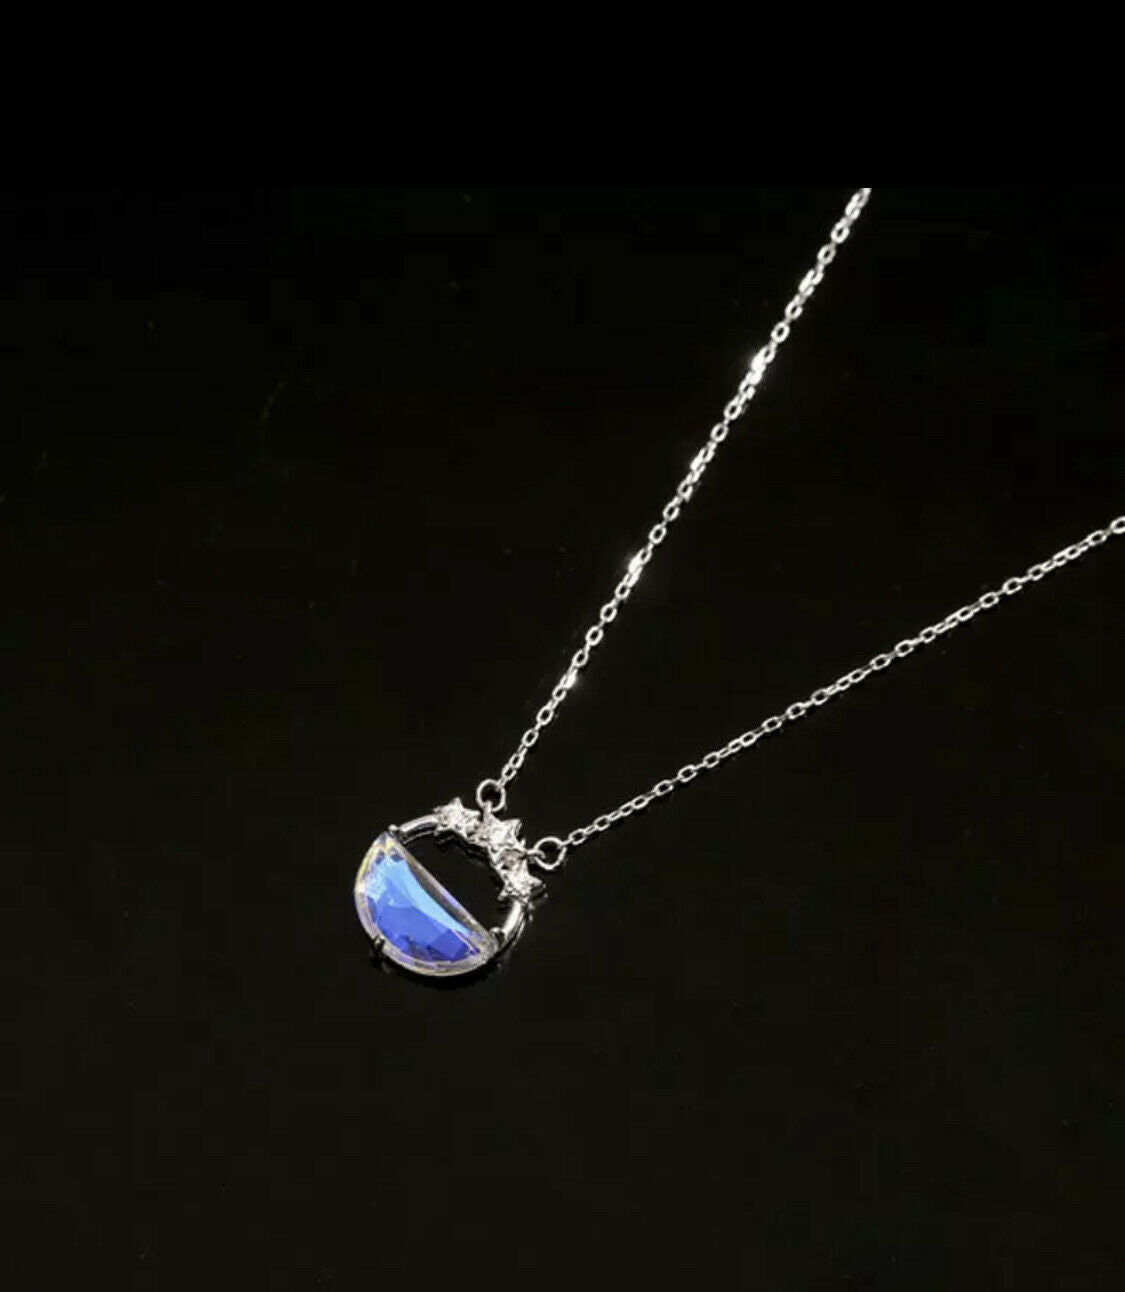 Moon Charm Pendant Silver Chain Necklace Glowing Luminous Stone Unbranded